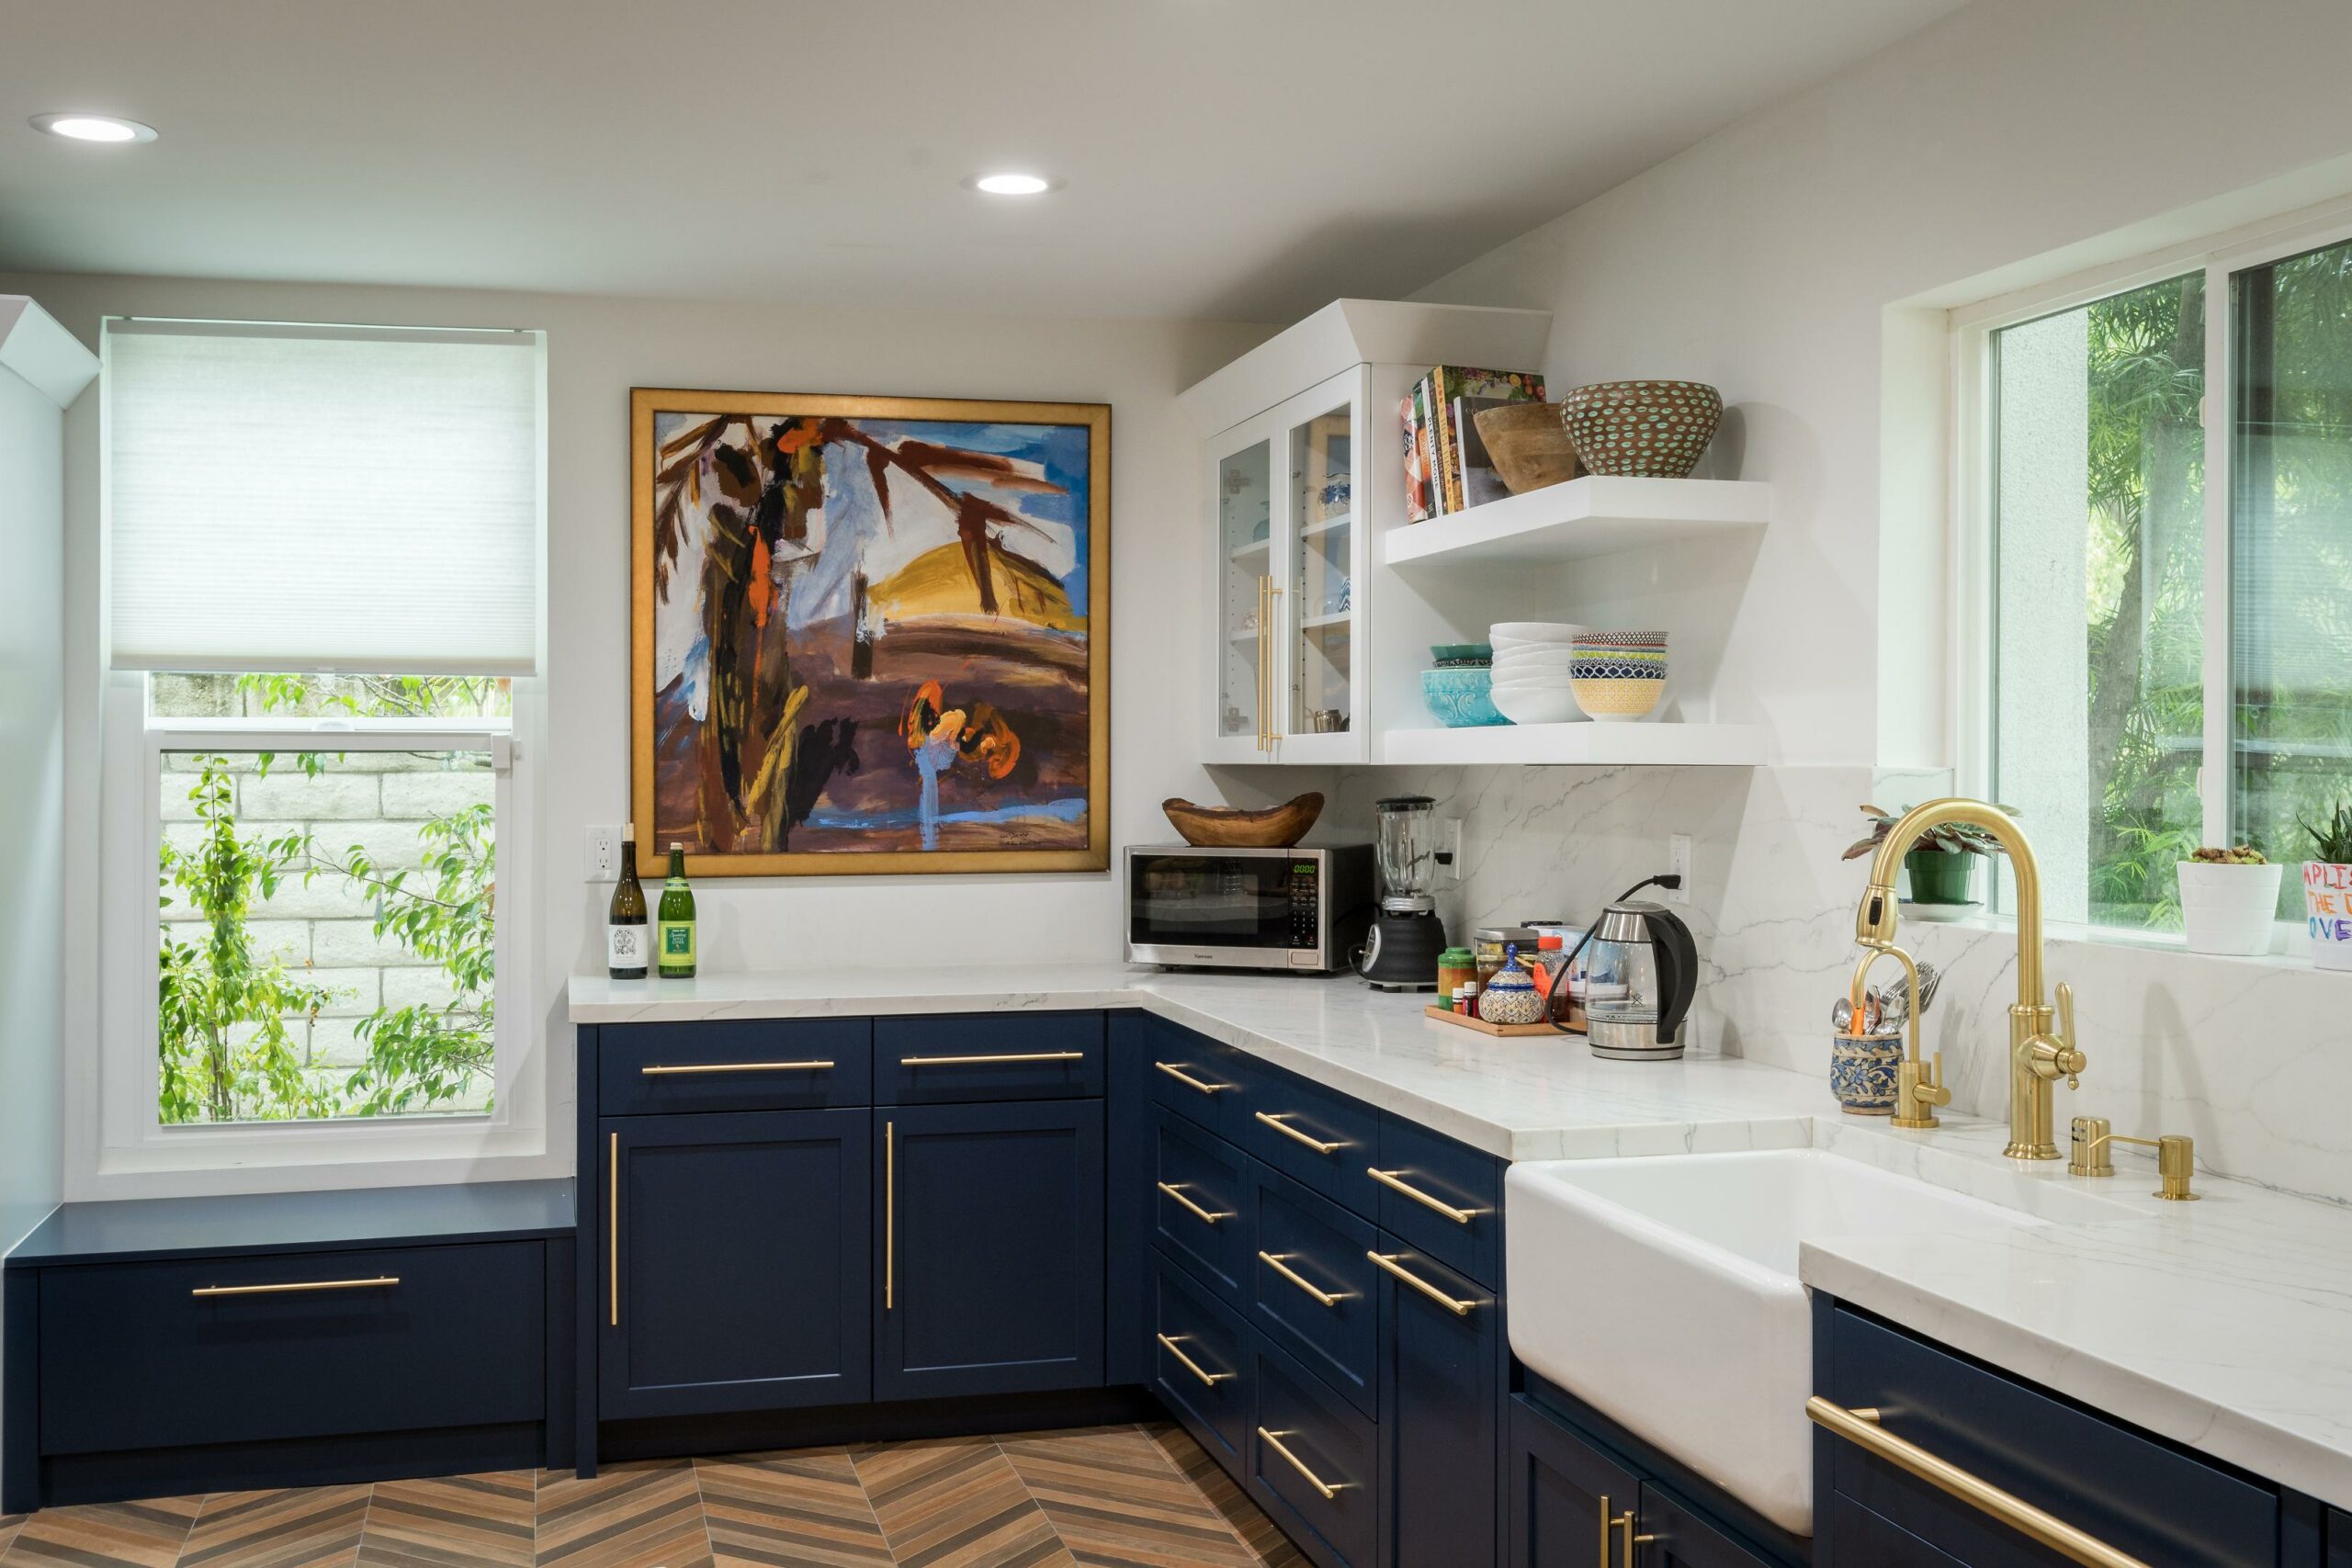 Modern kitchen interior with navy cabinets and marble countertop.